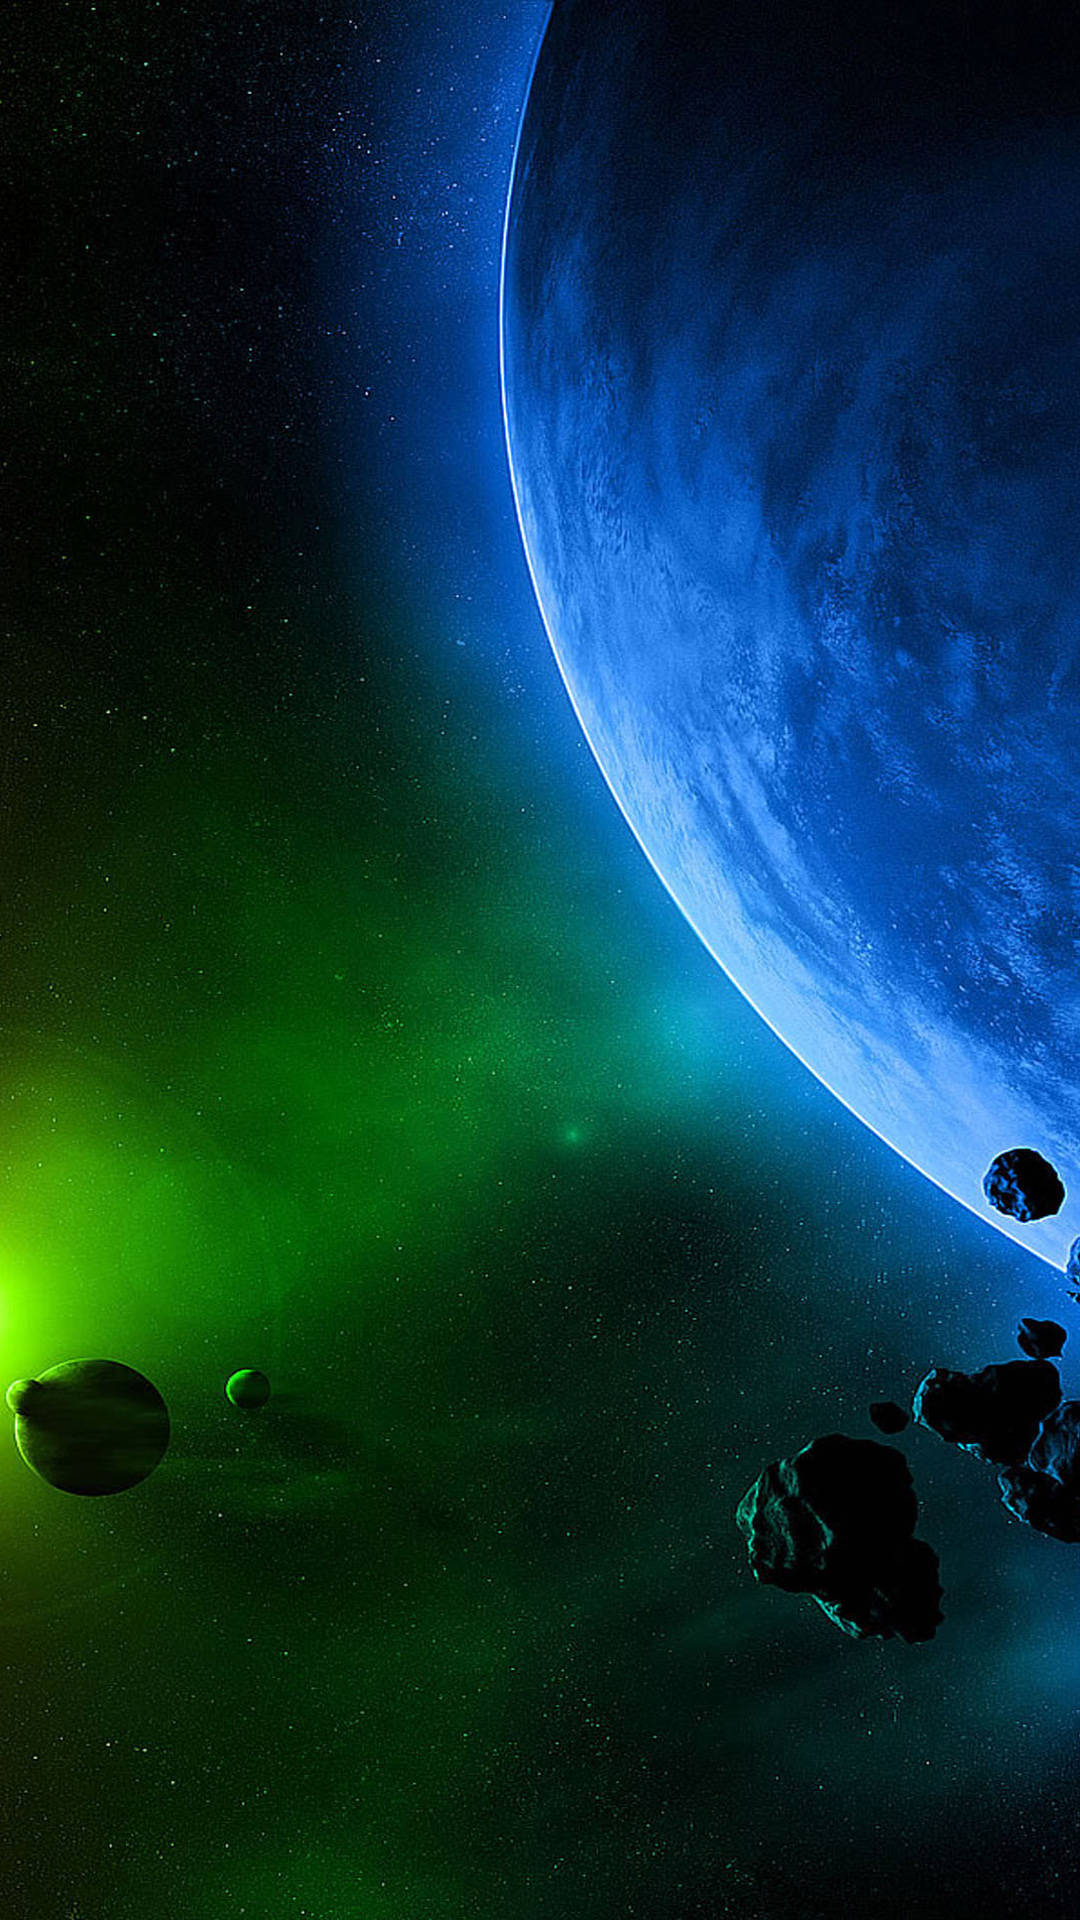 Out Space Scenery HD Samsung Galaxy S4 Wallpaper